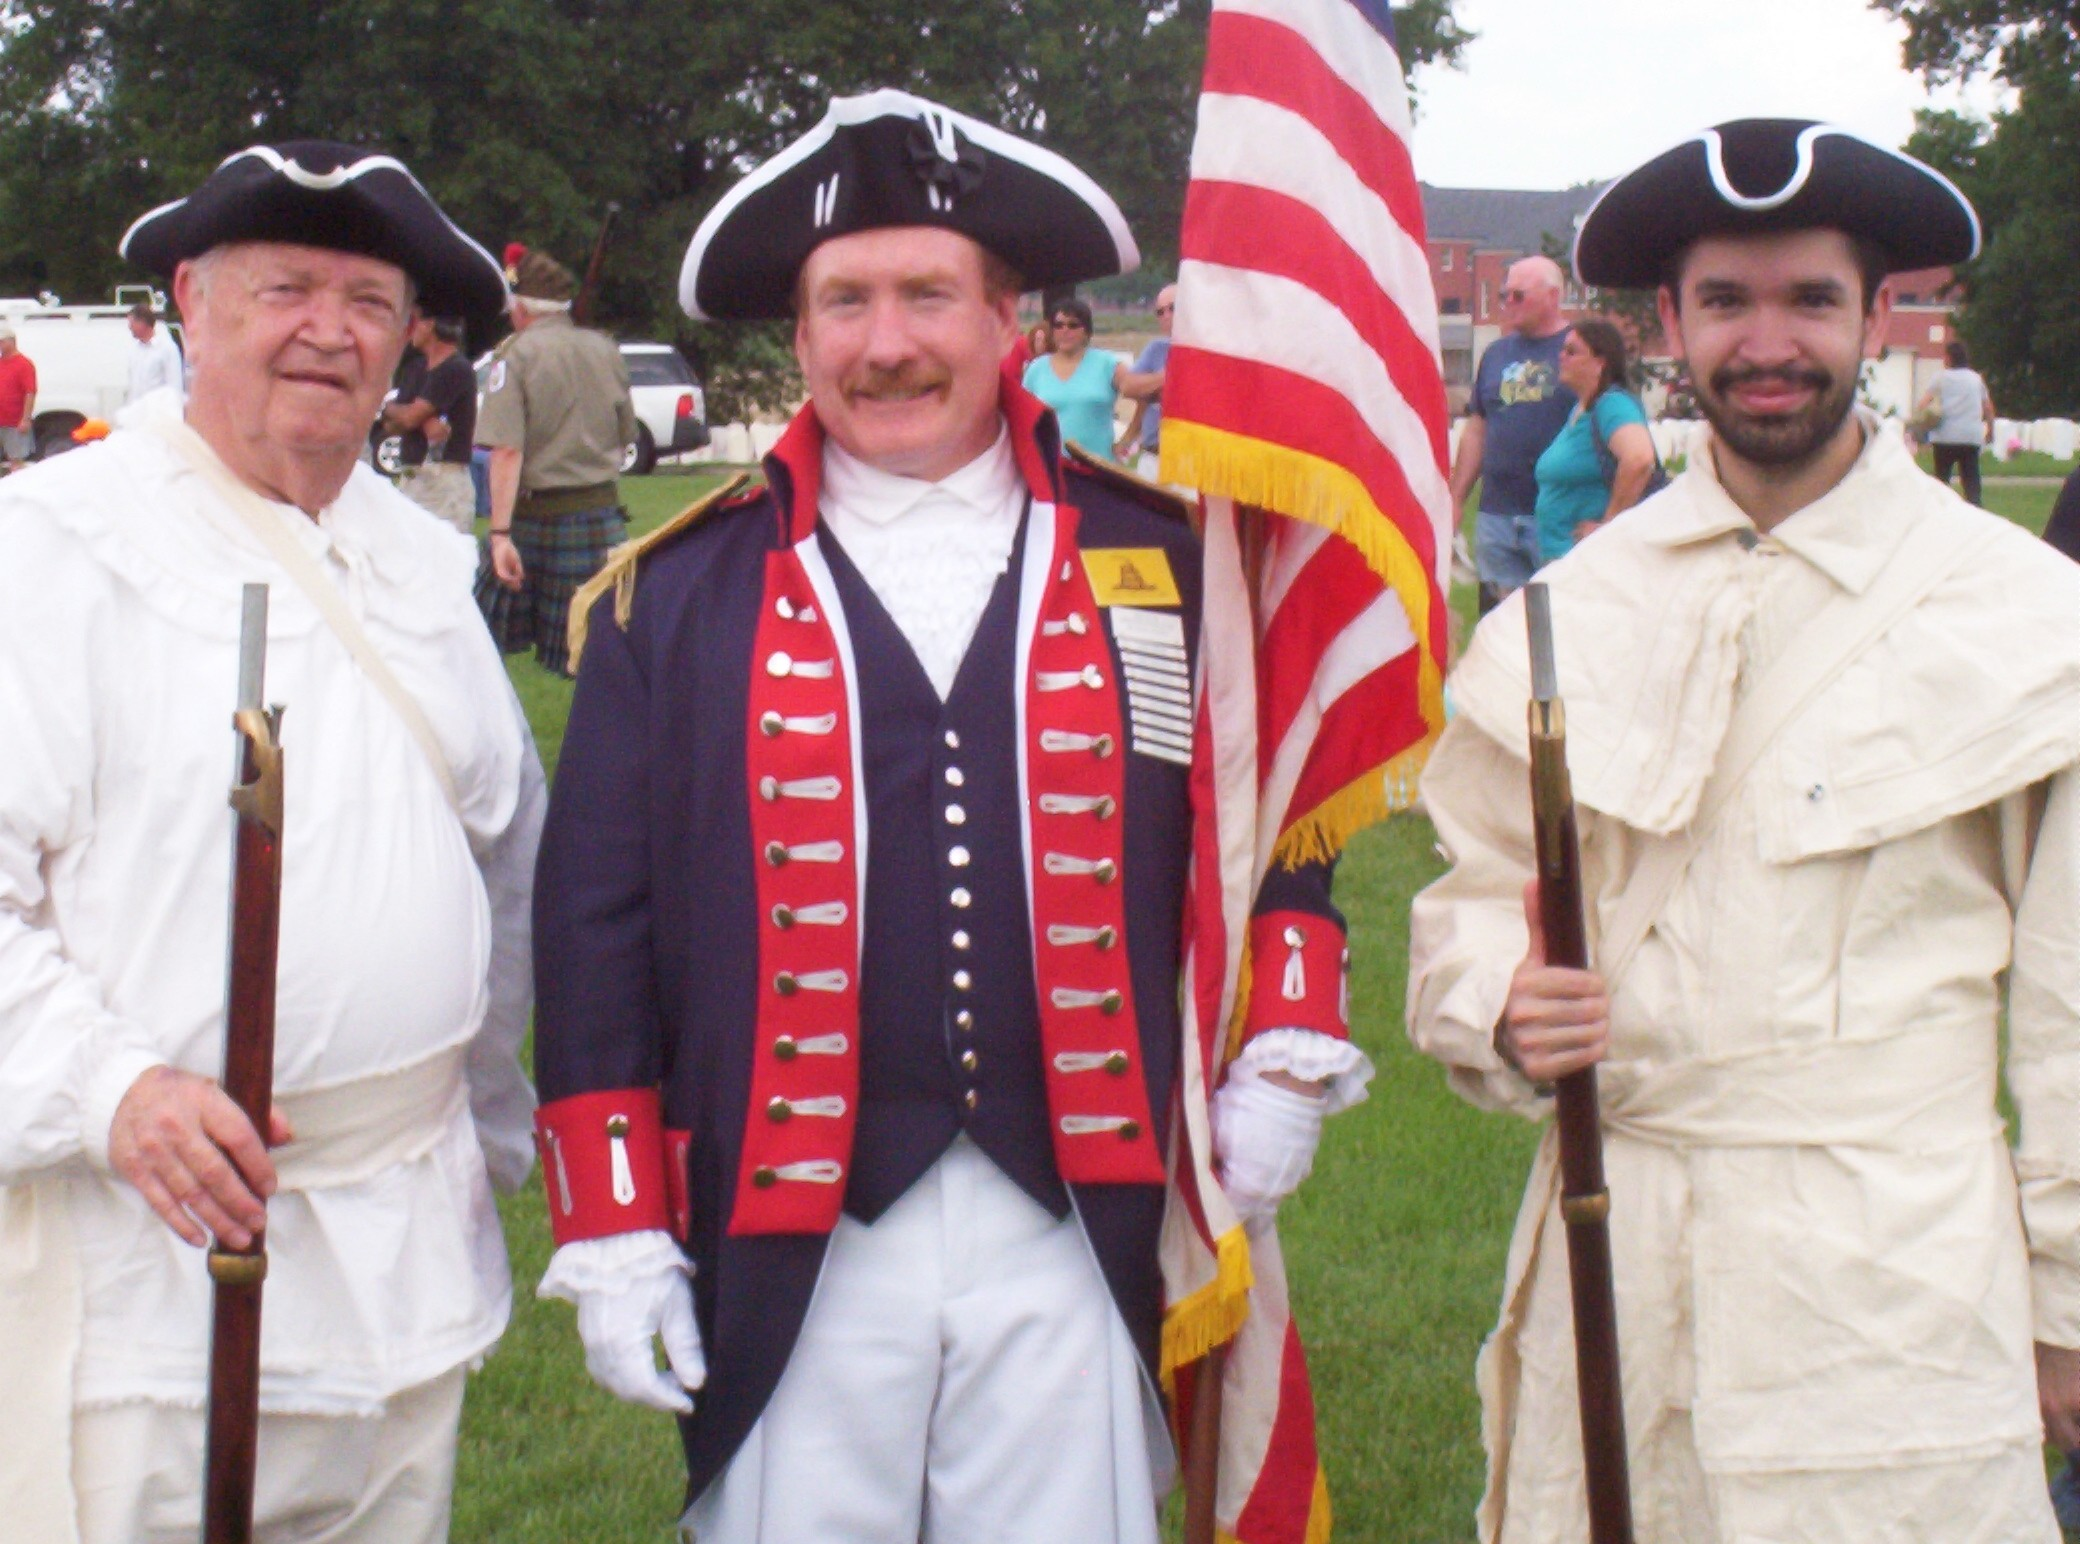 Shown here is the MOSSAR Color Guard Teams who participated on Memorial Day 2010. The Color Guard team participated in the Memorial Day event located at Jefferson Barracks in Lemay, MO.